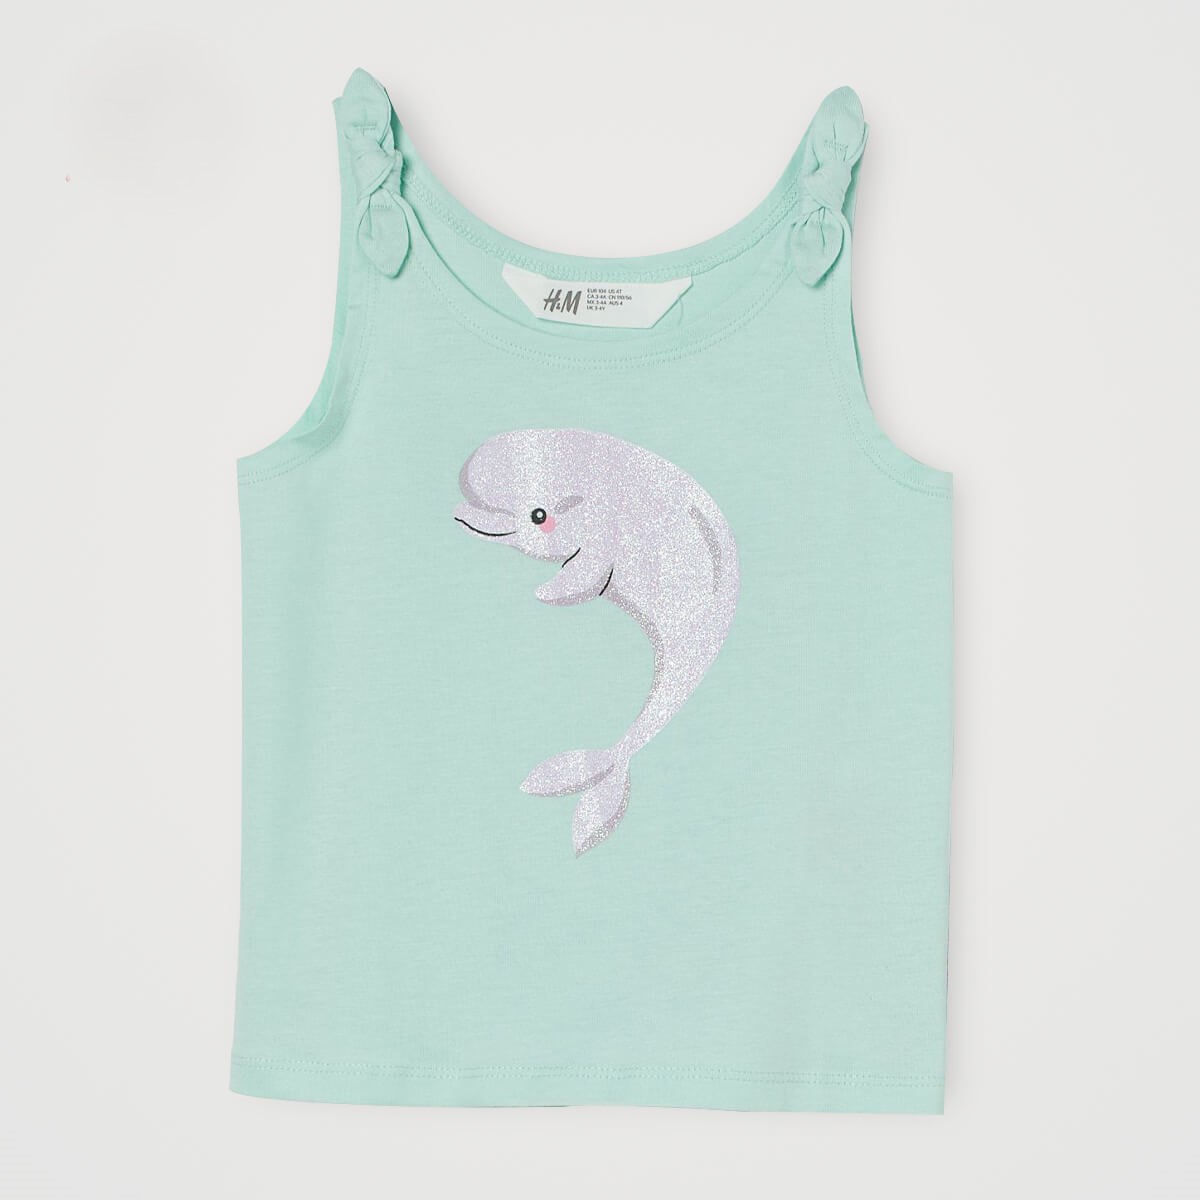 HM-LIGHT-TURQUOISE-DOLPHIN-PRINTED-TANK-TOP